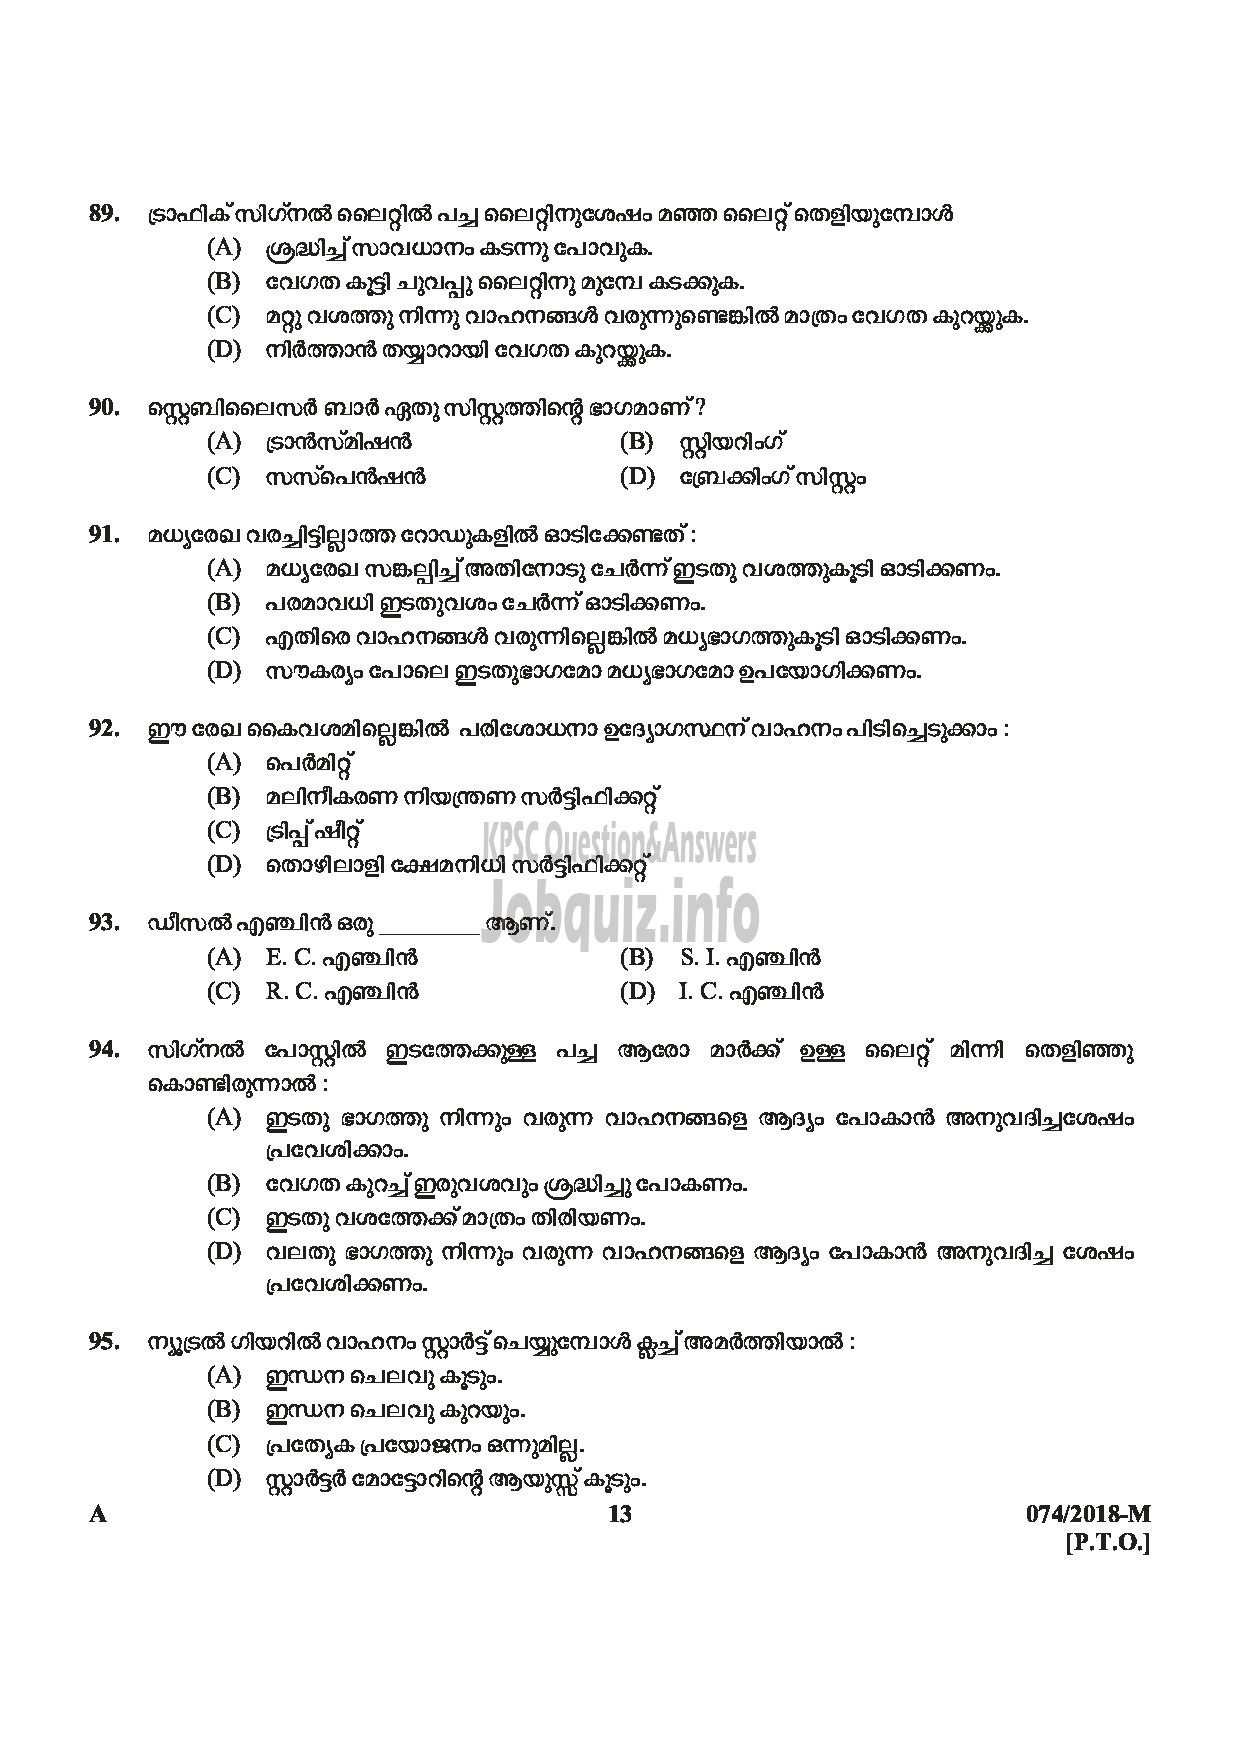 Kerala PSC Question Paper - POLICE CONSTABLE DRIVER ARMED POLICE BATTALION POLICE-13